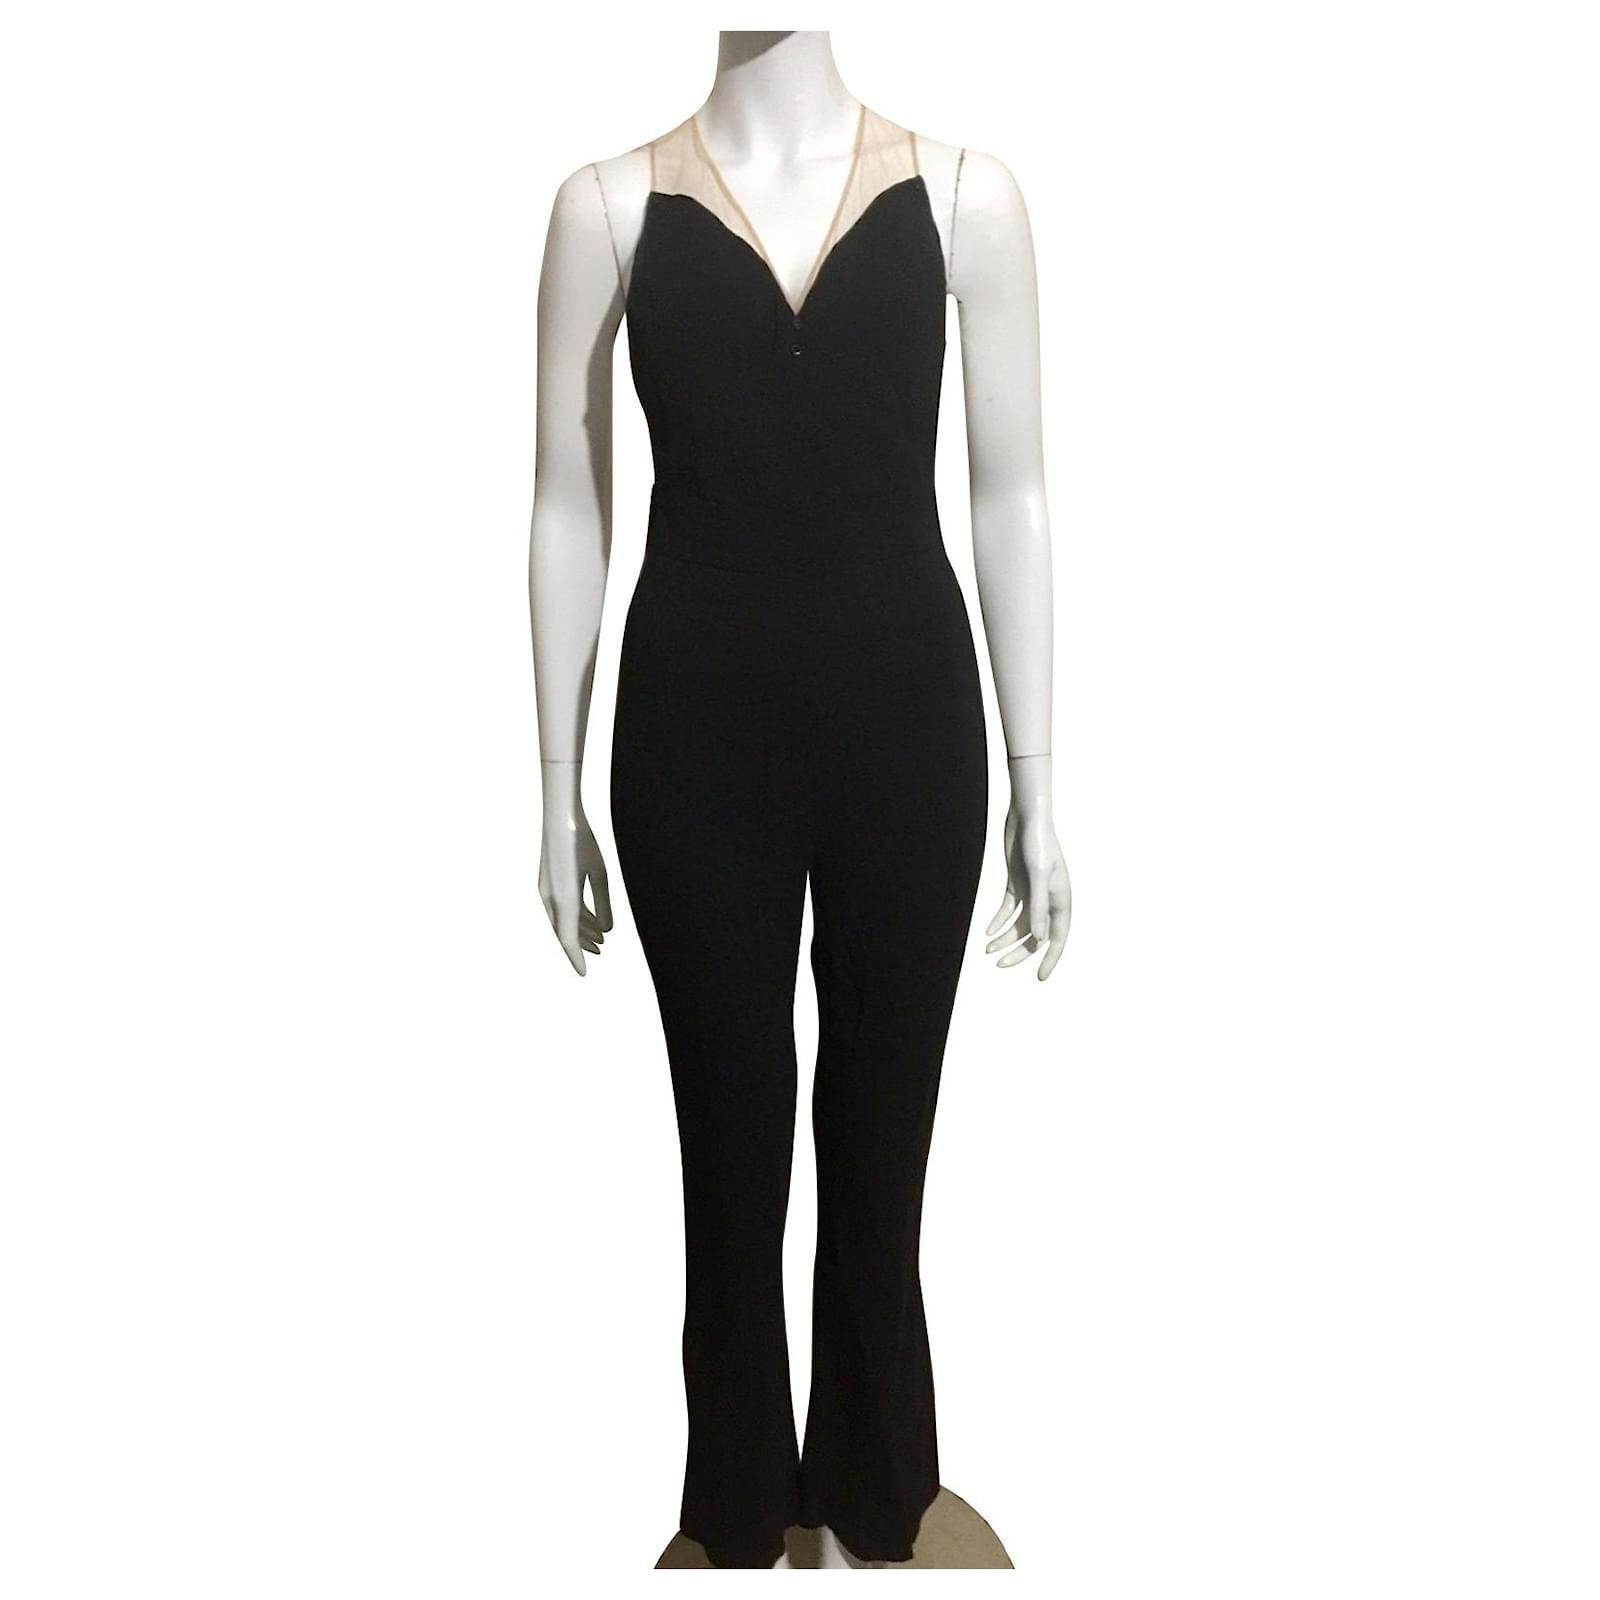 Evening jump suit with illusion neck